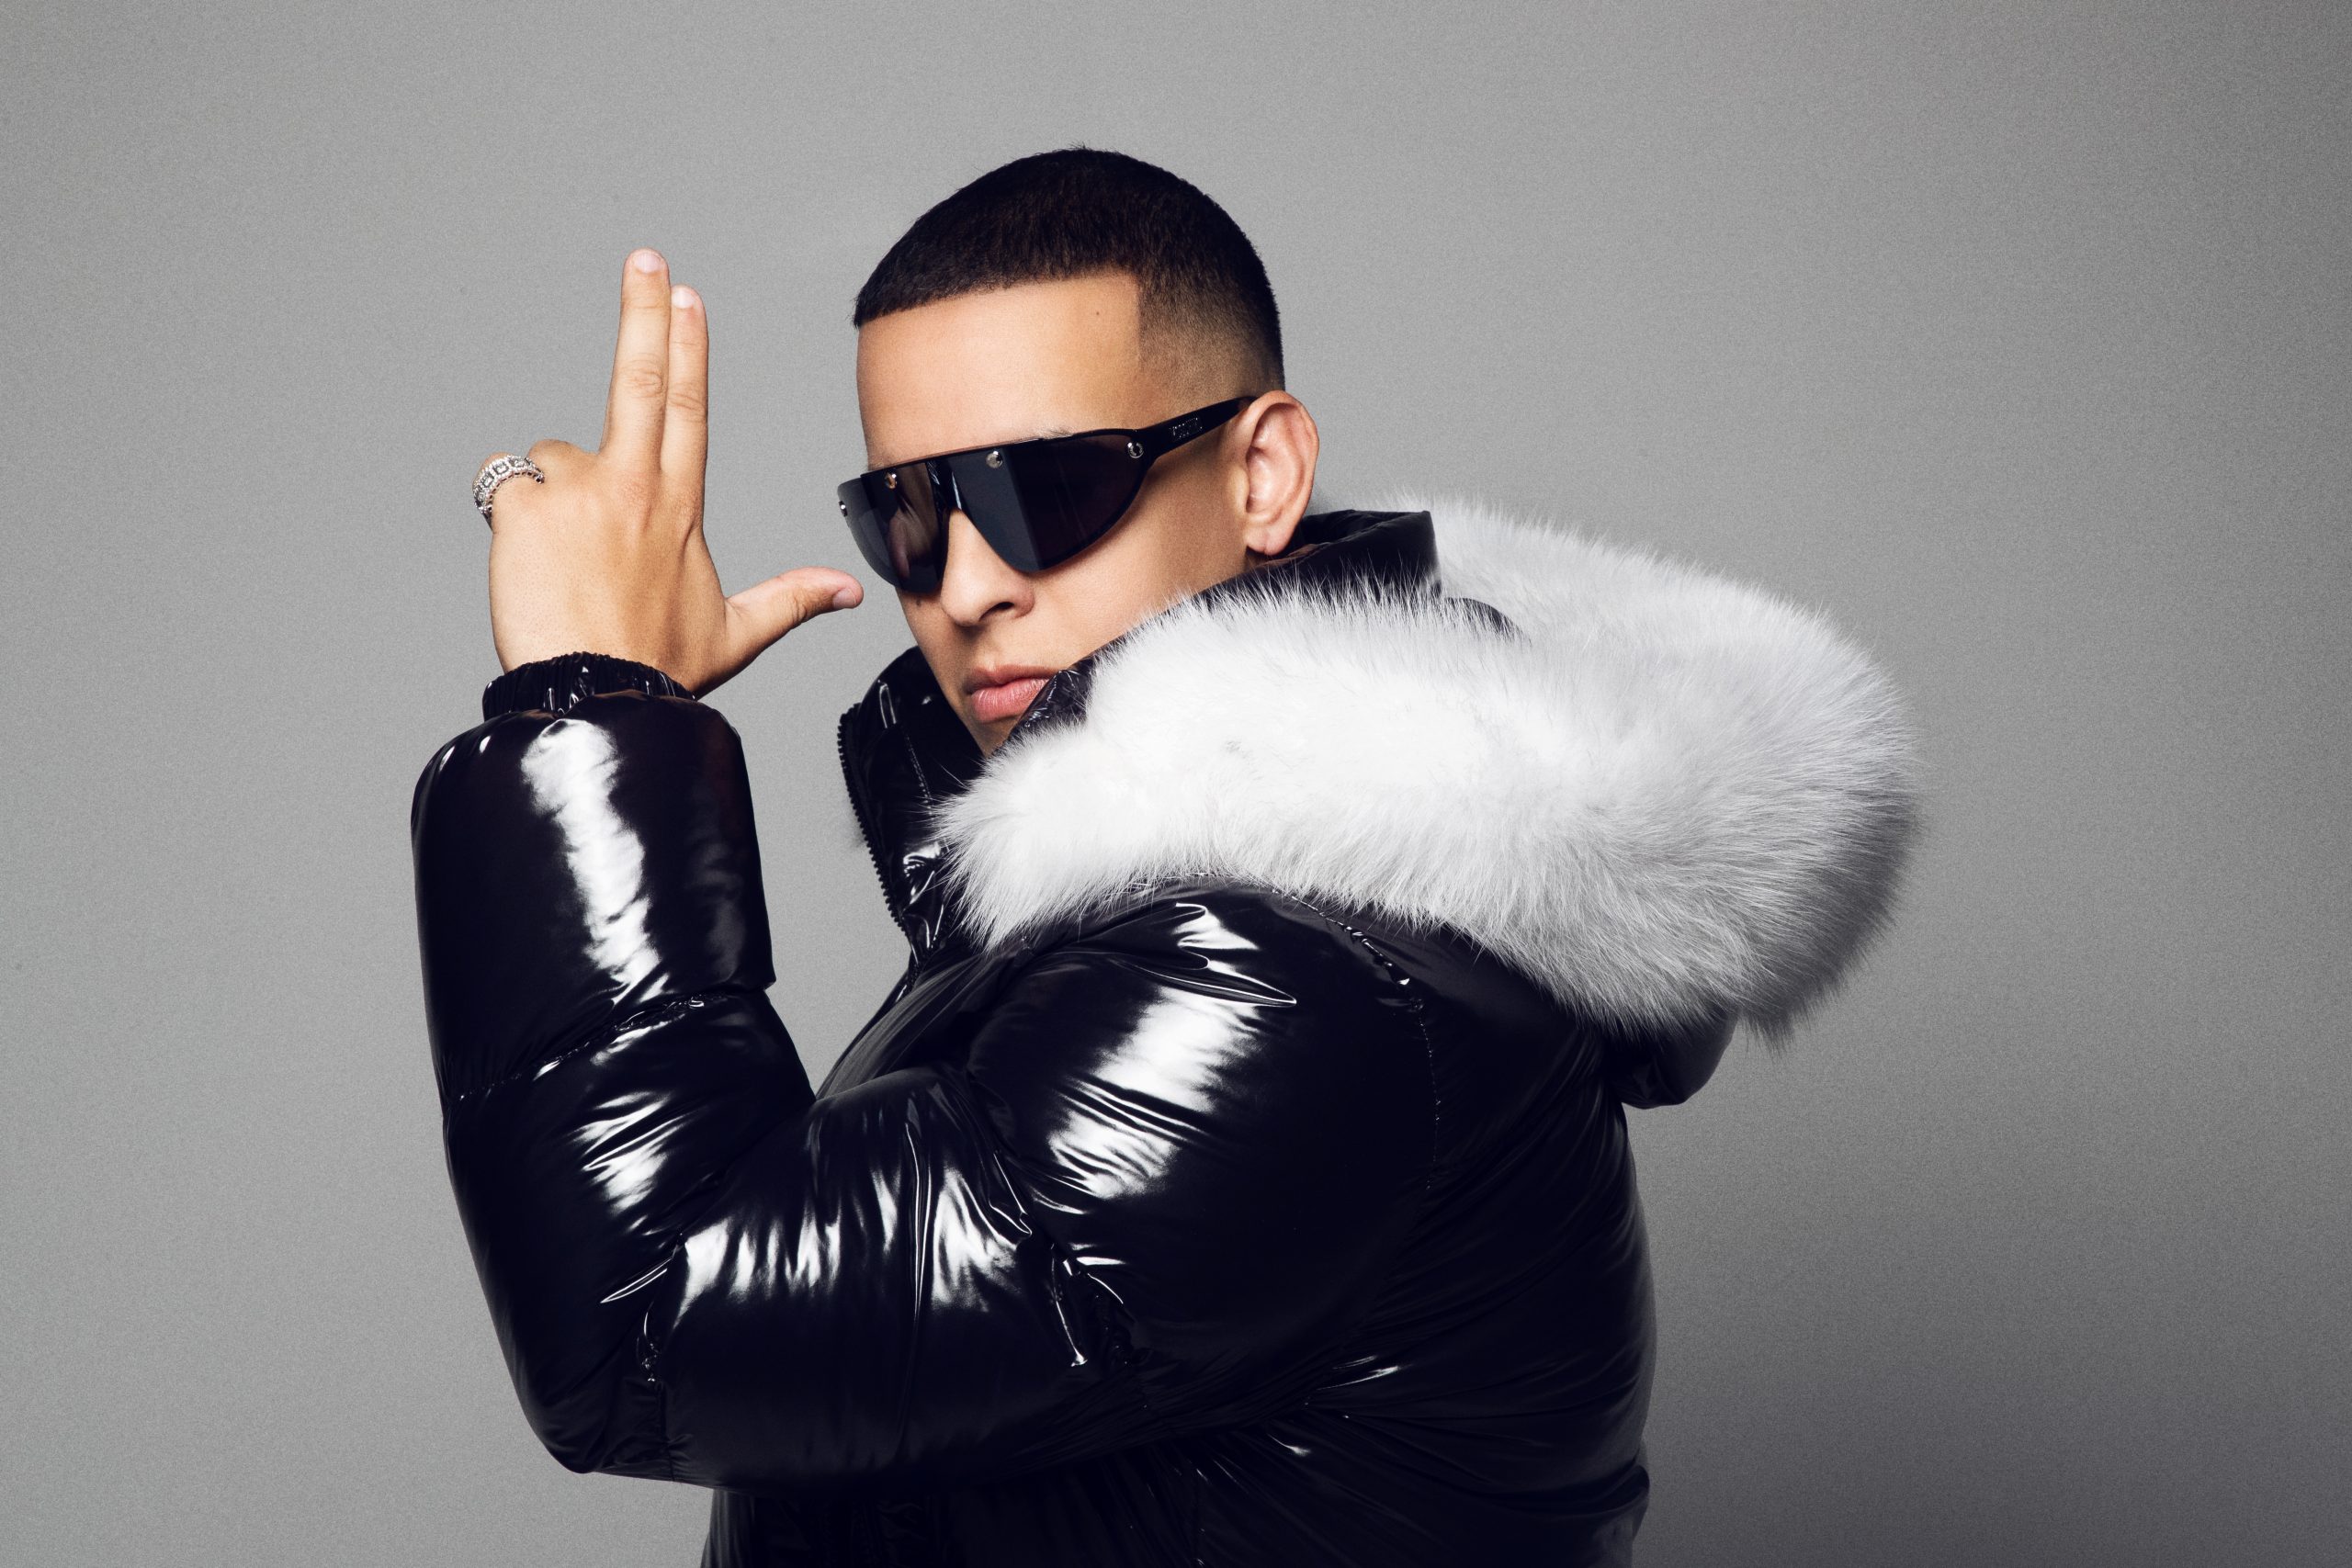 DADDY YANKEE TAKES OVER ABC WITH HIS HISTORIC PERFORMANCE OF HIS GLOBAL HIT “PROBLEMA”